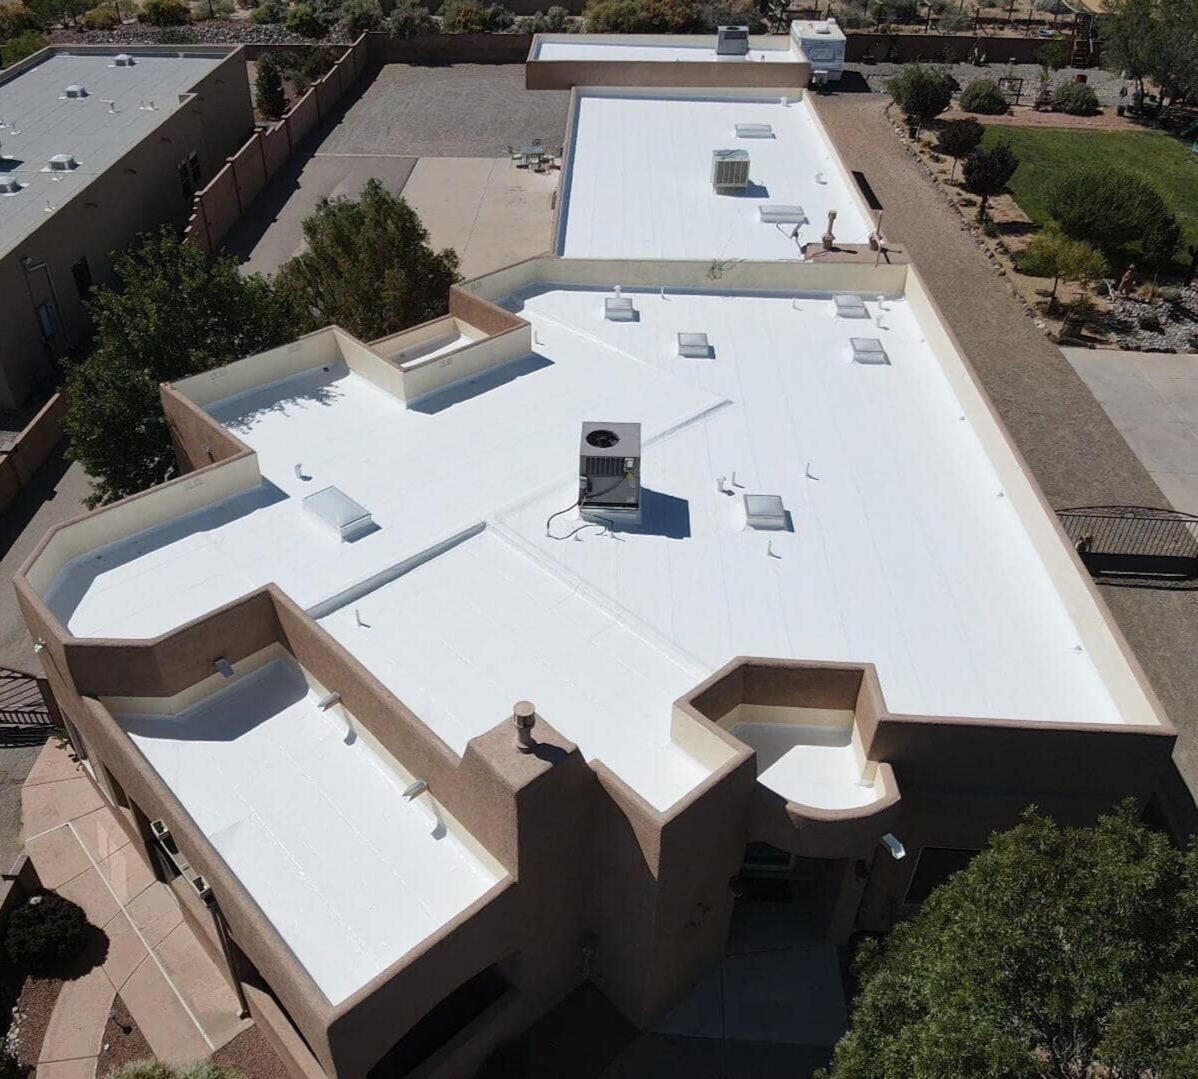 Residential flat roof in Albuquerque, New Mexico, recently outfitted with a white TPO (Thermoplastic Polyolefin) membrane for enhanced protection and energy efficiency.